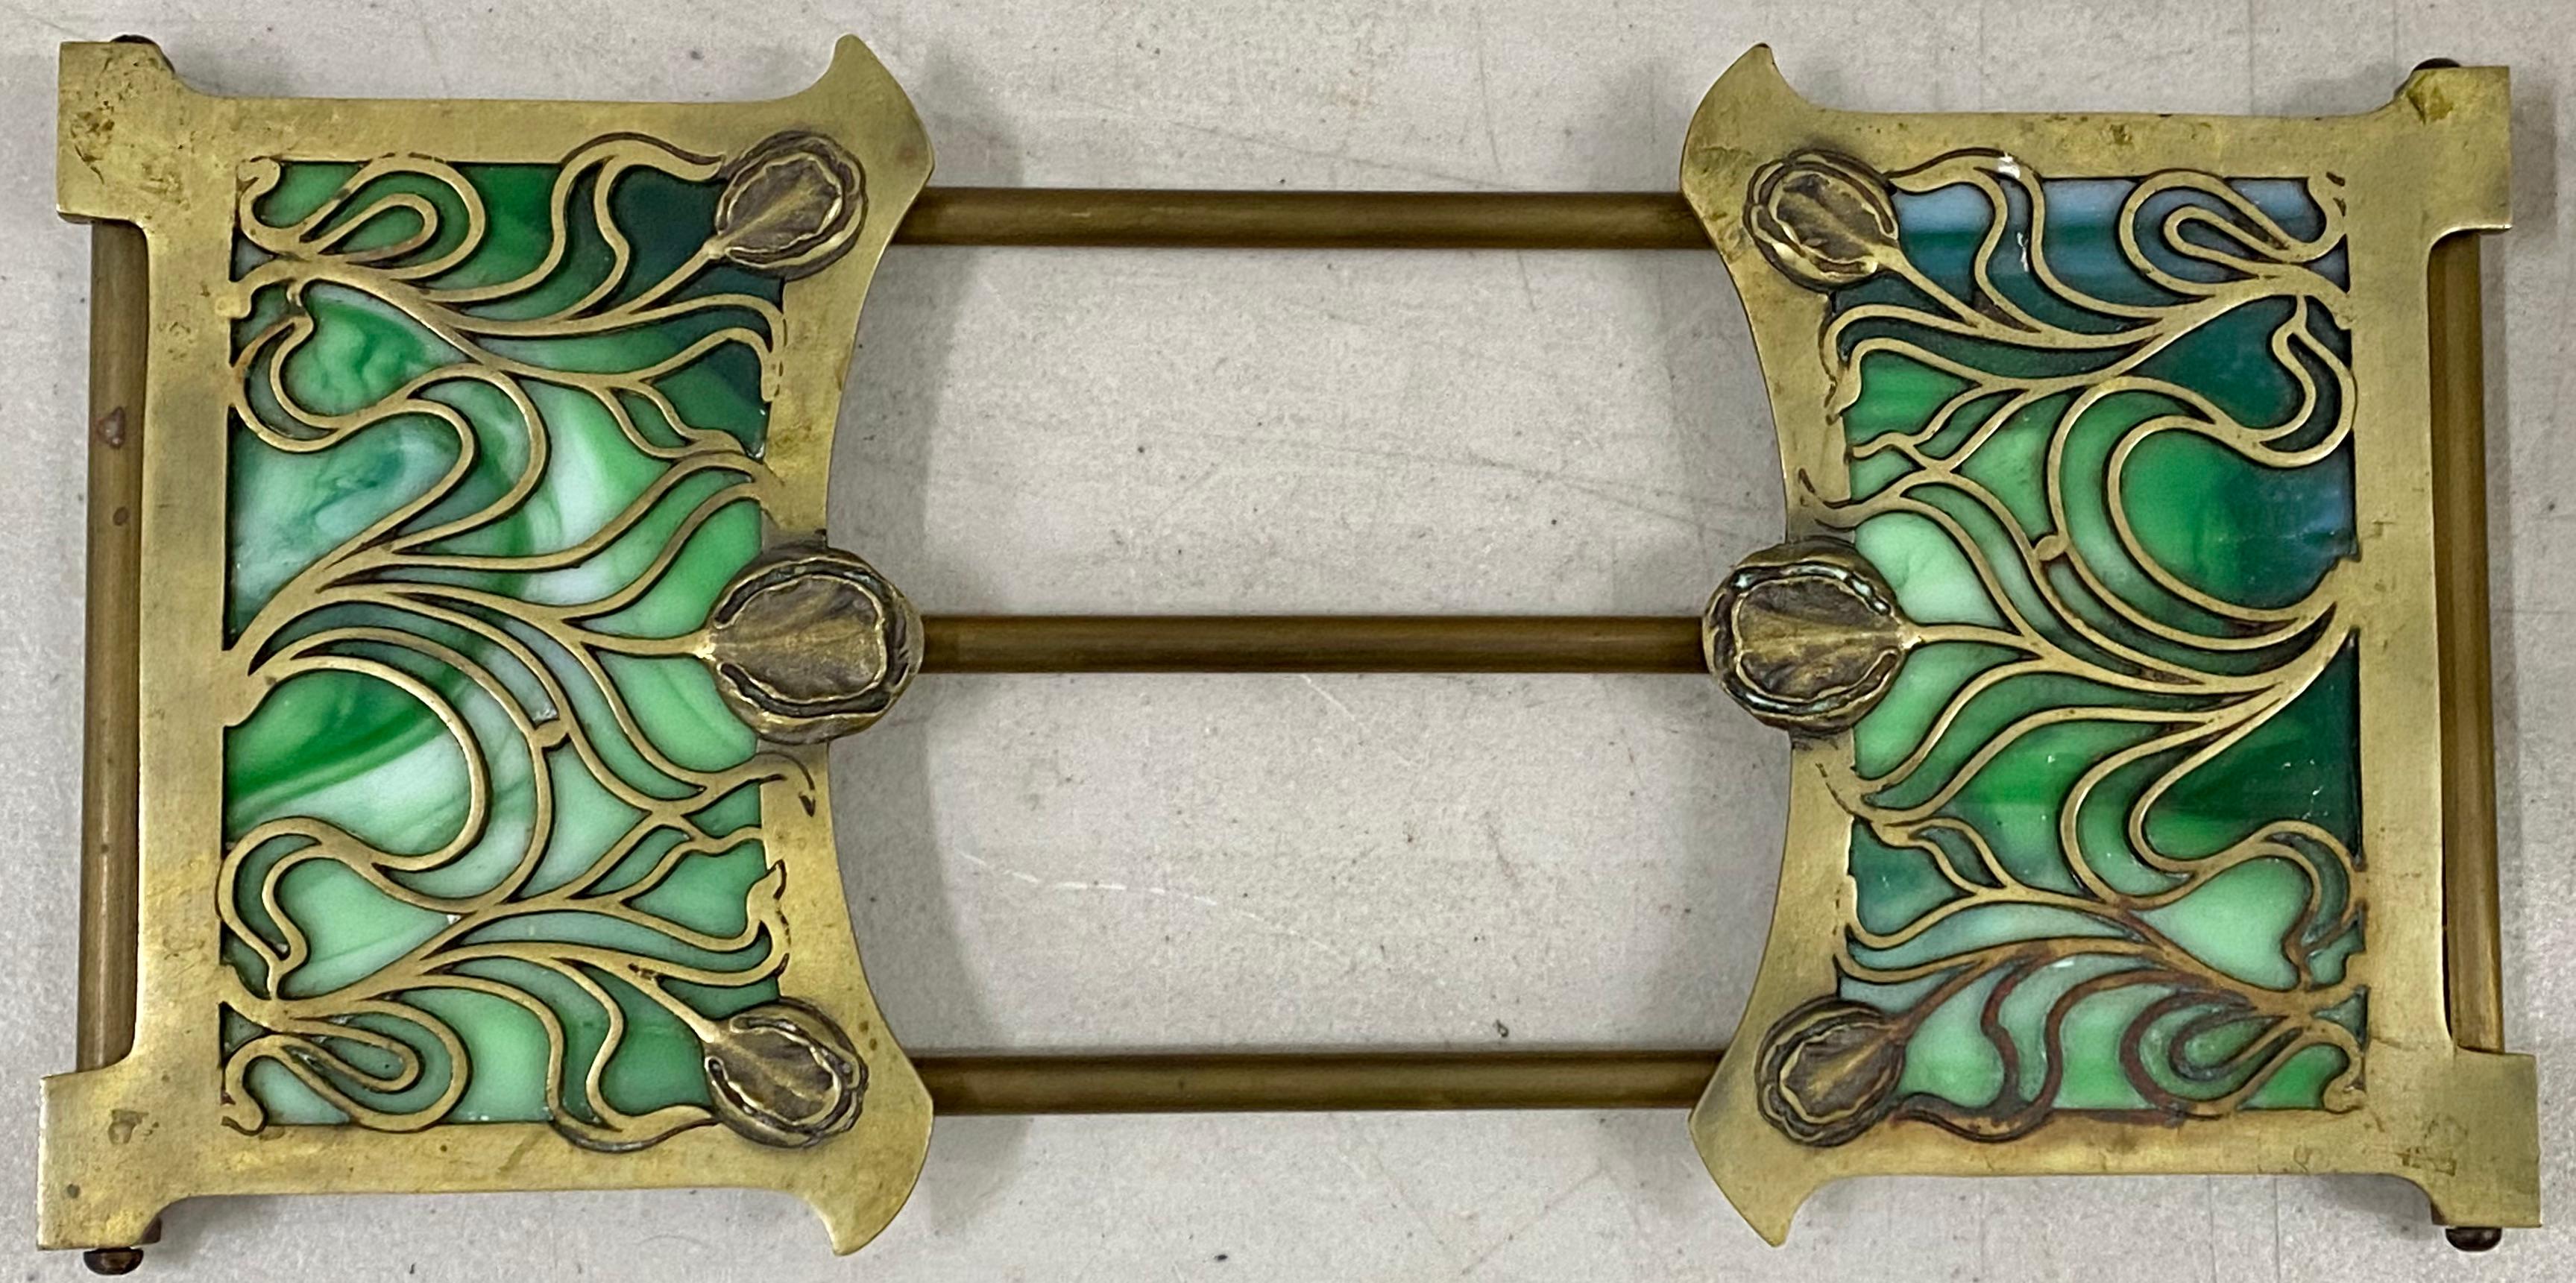 Early 20th century brass & stained glass folding / expanding book holder C.1910

Beautiful Art Nouveau expanding book holder

Measures: 13